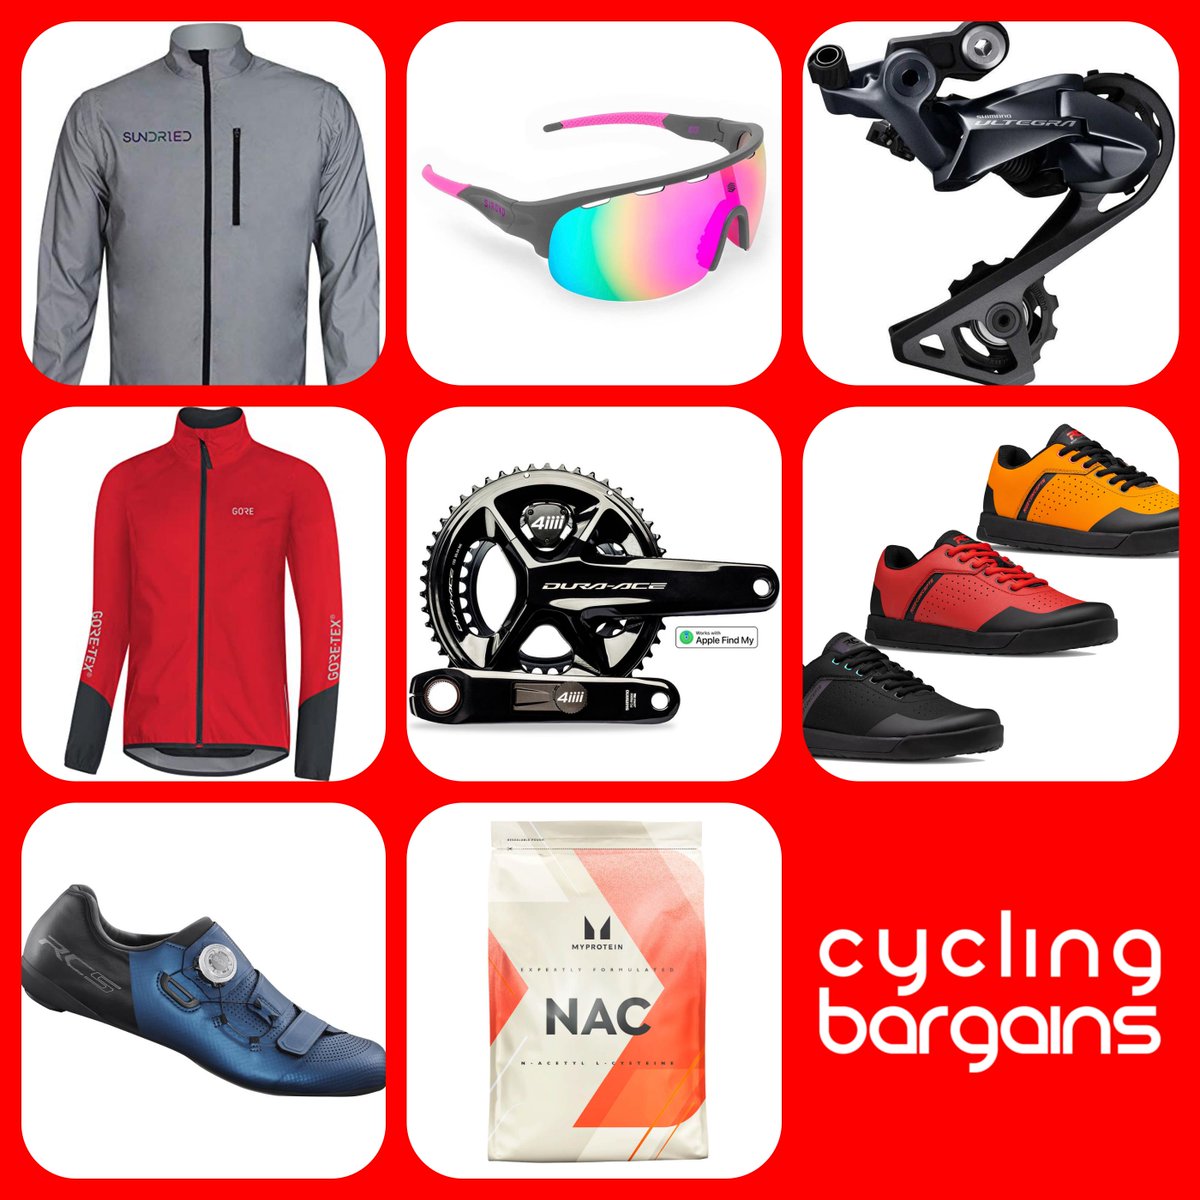 #CyclingBargains - Saturdays PriceDrops available
.
👉 bit.ly/pricedrops1
👉 bit.ly/cyclingdiscoun…
.
#roadcycling #cycling #cyclinglife #roadbike #cyclist #instacycling #ciclismo #bikelife #bicycle #strava #mtb #bikeporn #lovecycling #instabike #rideyourbike #cyclinglove